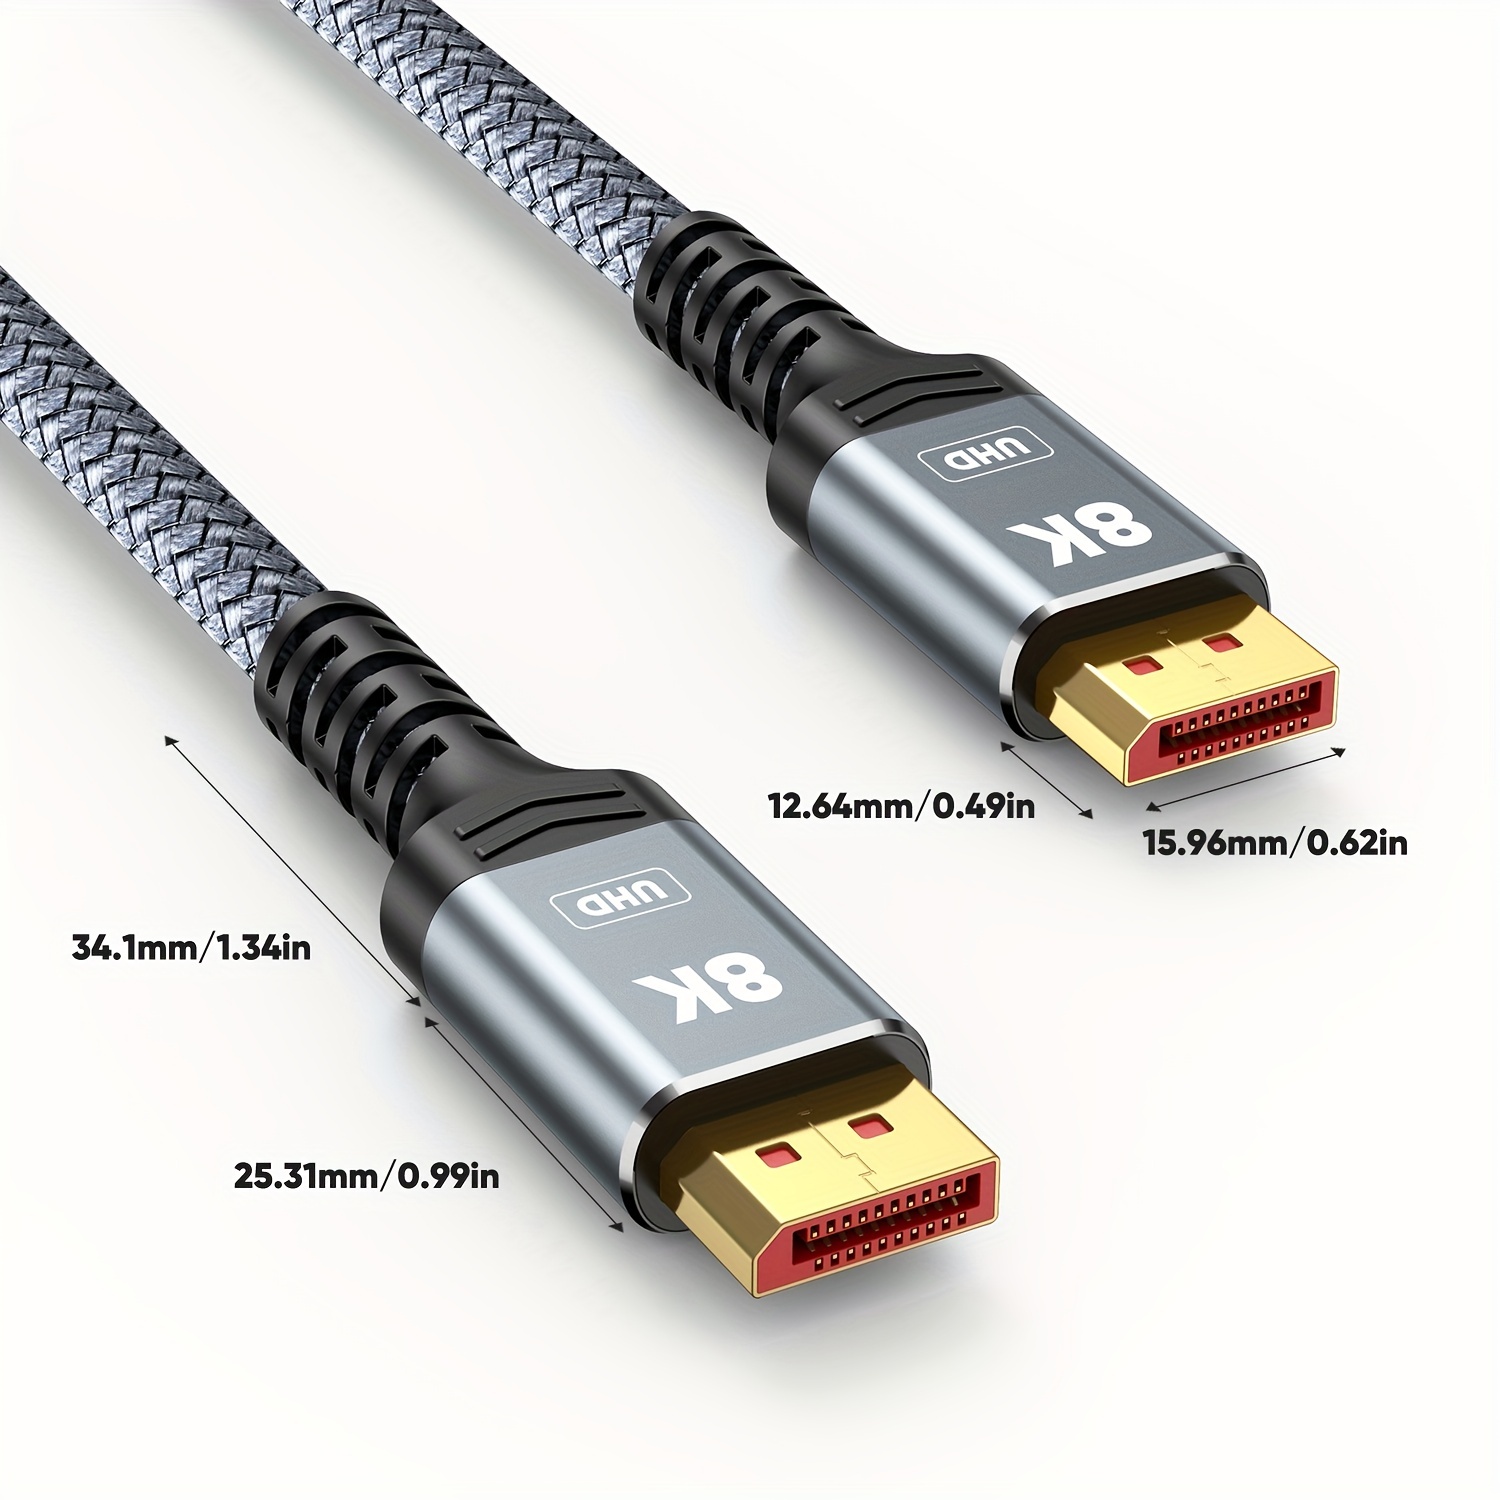 DisplayPort 1.4 Cable 8K@60Hz 4K@144Hz 1080P@240Hz 32.4Gbps for Gaming  Monitor HDCP 2.2 Graphics Card PC HDTV DP Cable